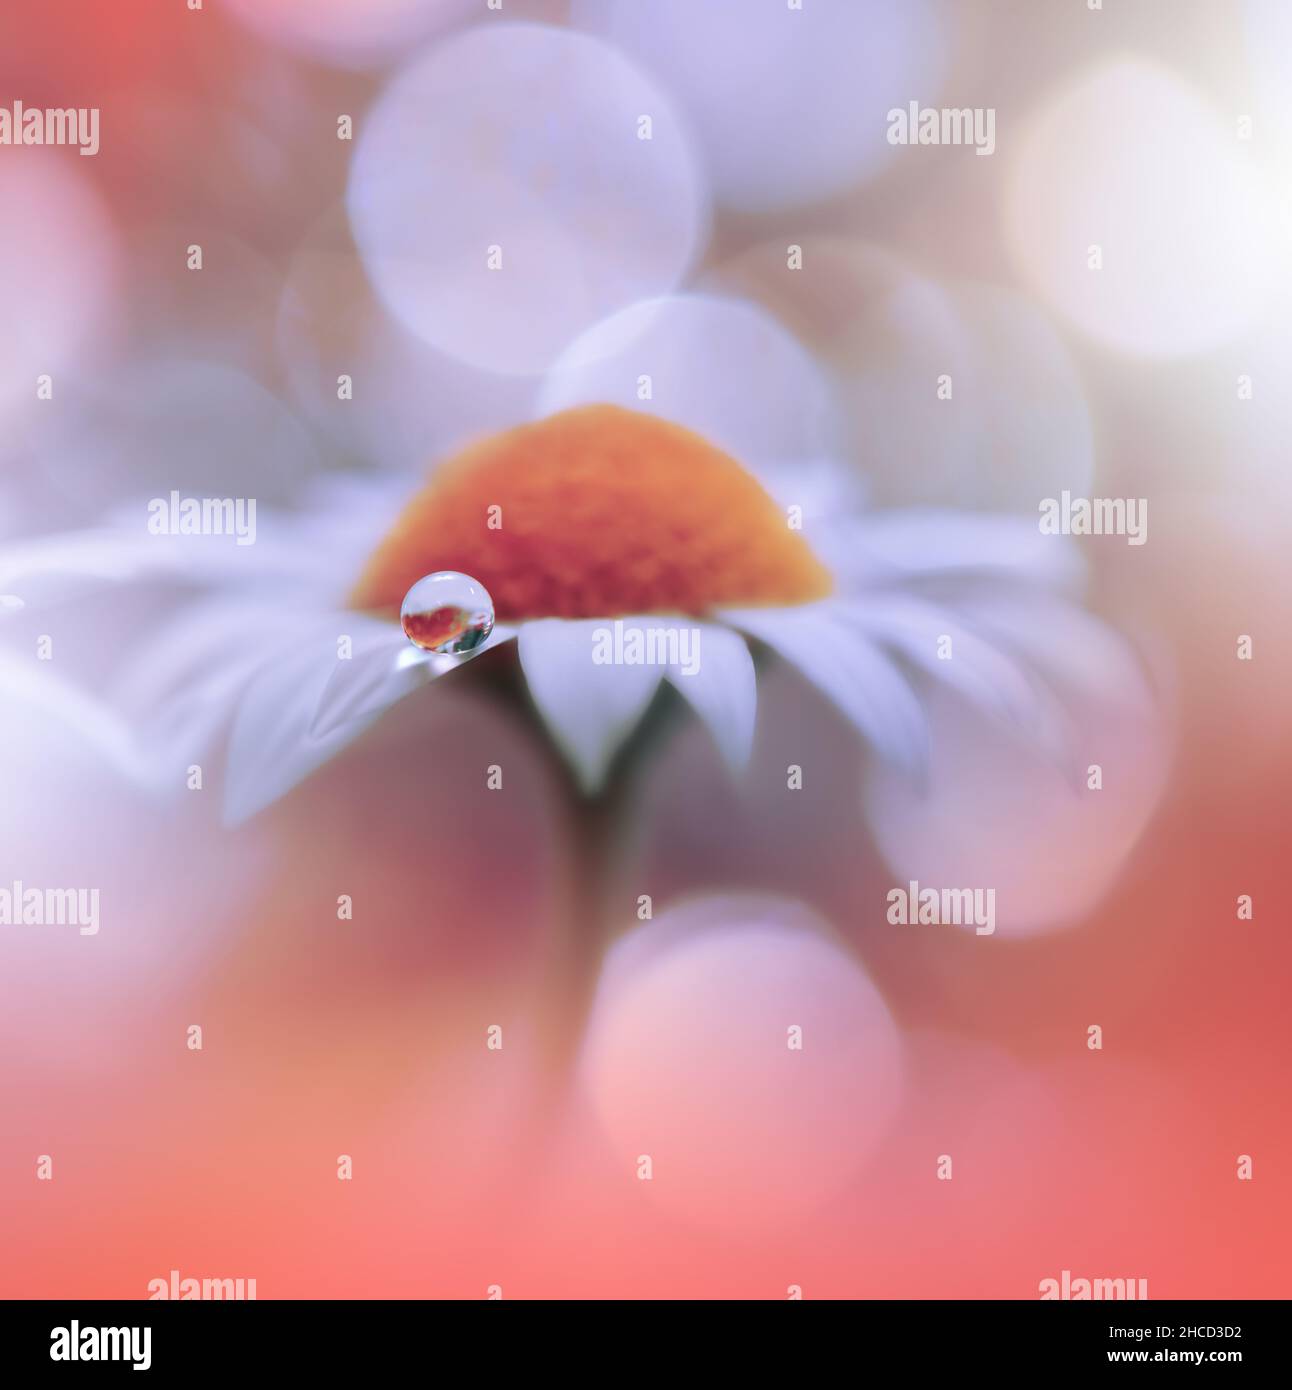 Beautiful Nature Background.Floral Art Design.Abstract Macro Photography.White Daisy Flower.Pastel Flowers.Orange Background.Creative Artistic Drop. Stock Photo